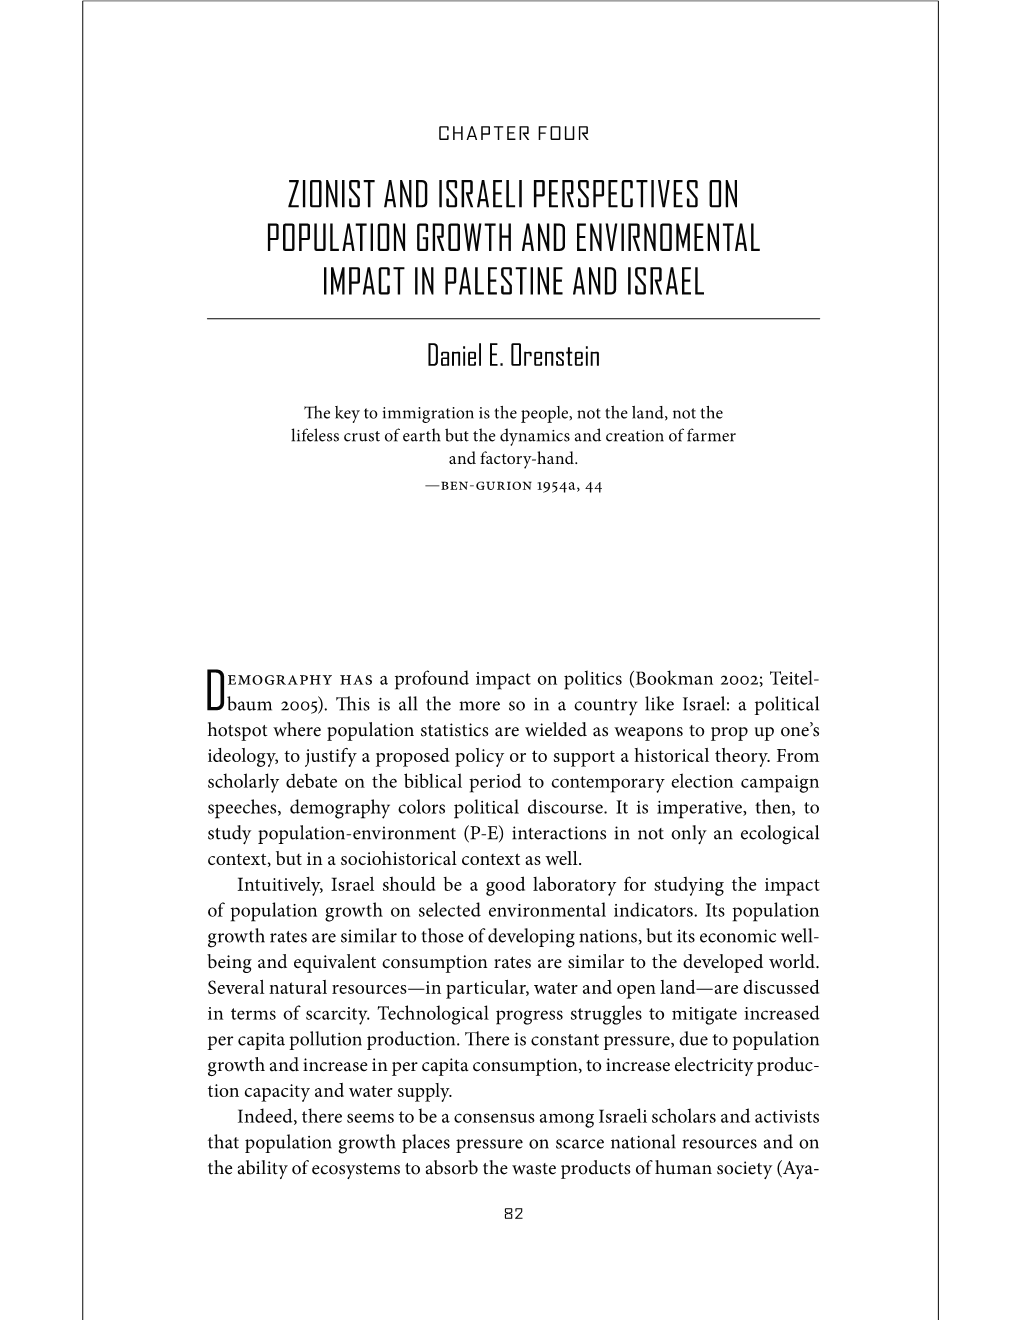 Zionist and Israeli Perspectives on Population Growth and Envirnomental Impact in Palestine and Israel